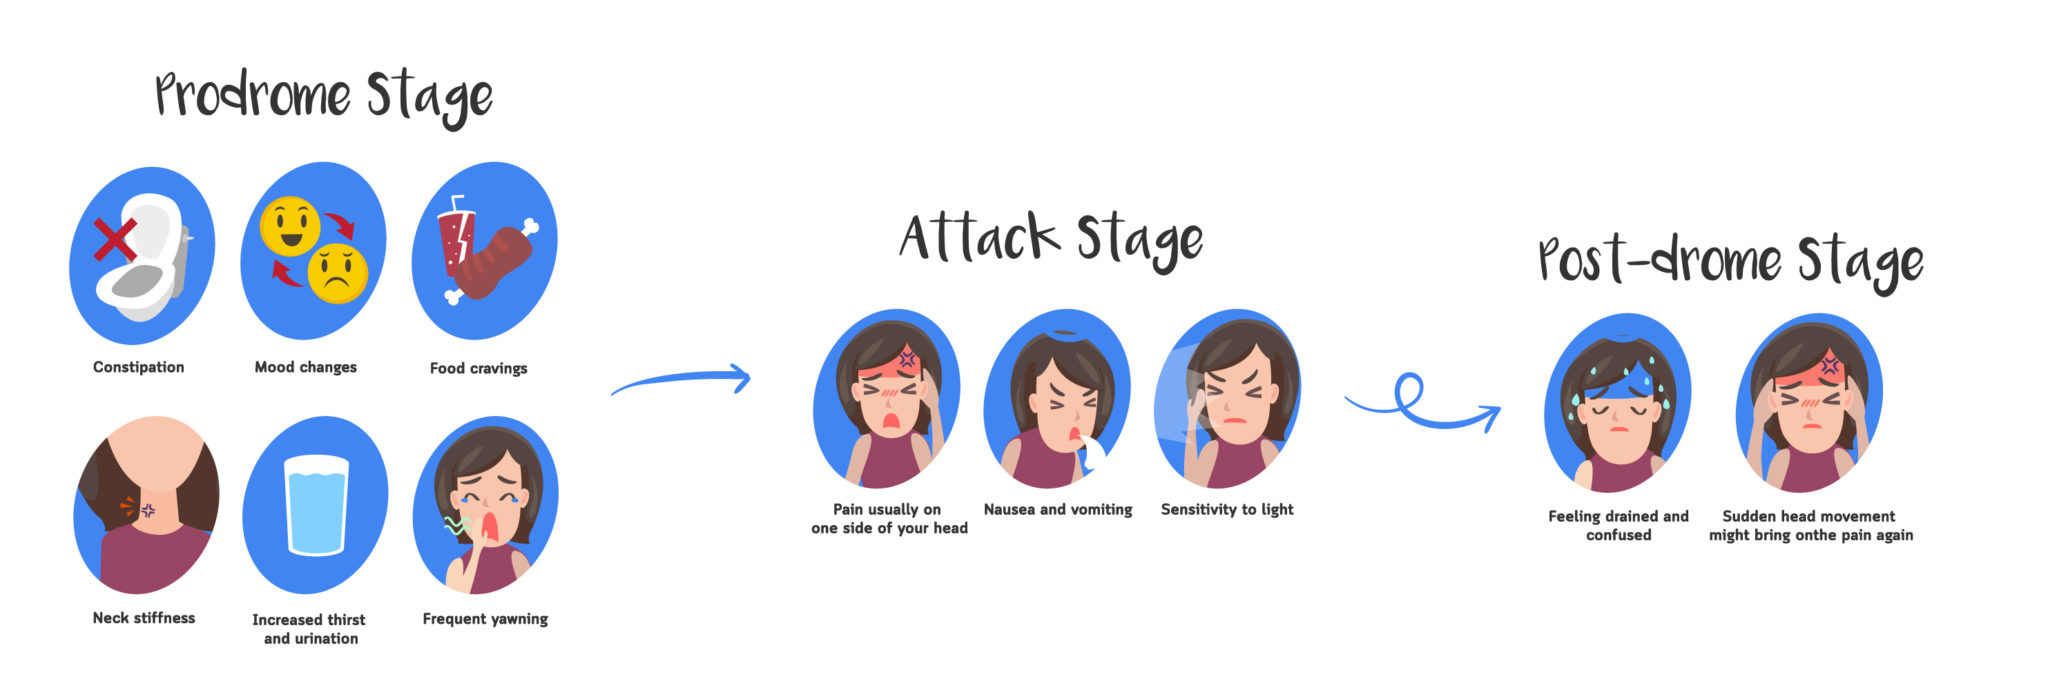 Stages of migraine